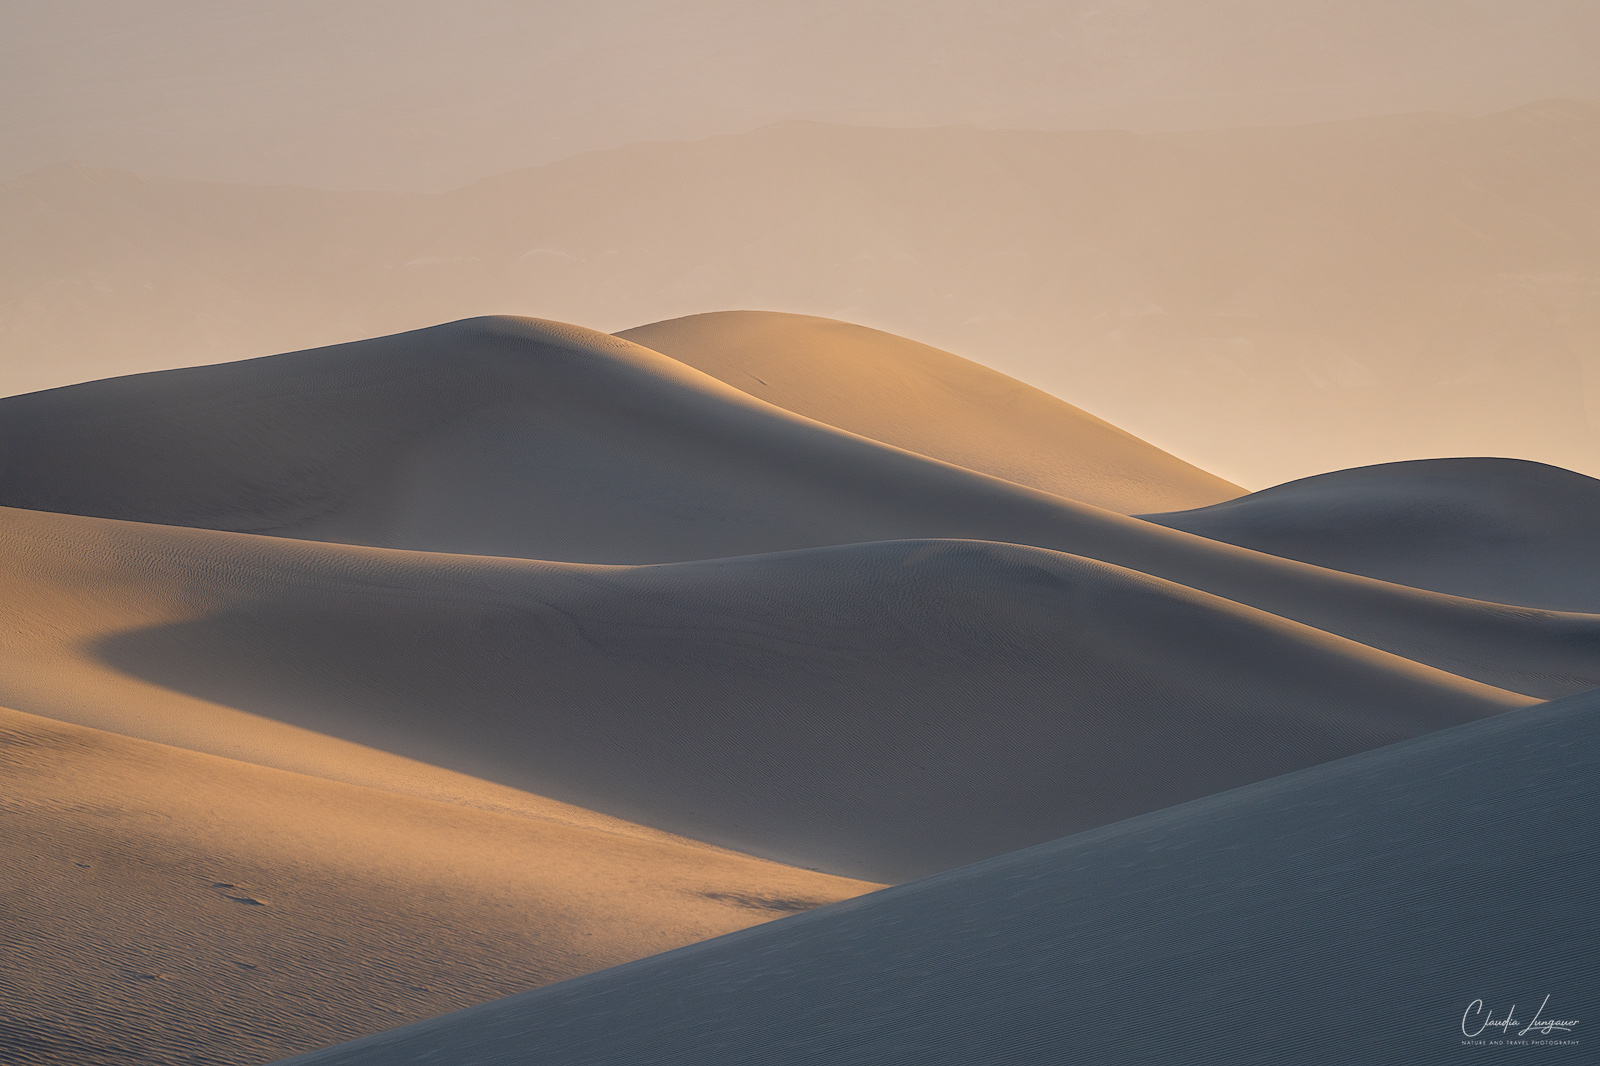 View of Mesquite Dunes at sunrise in Death Valley National Park.